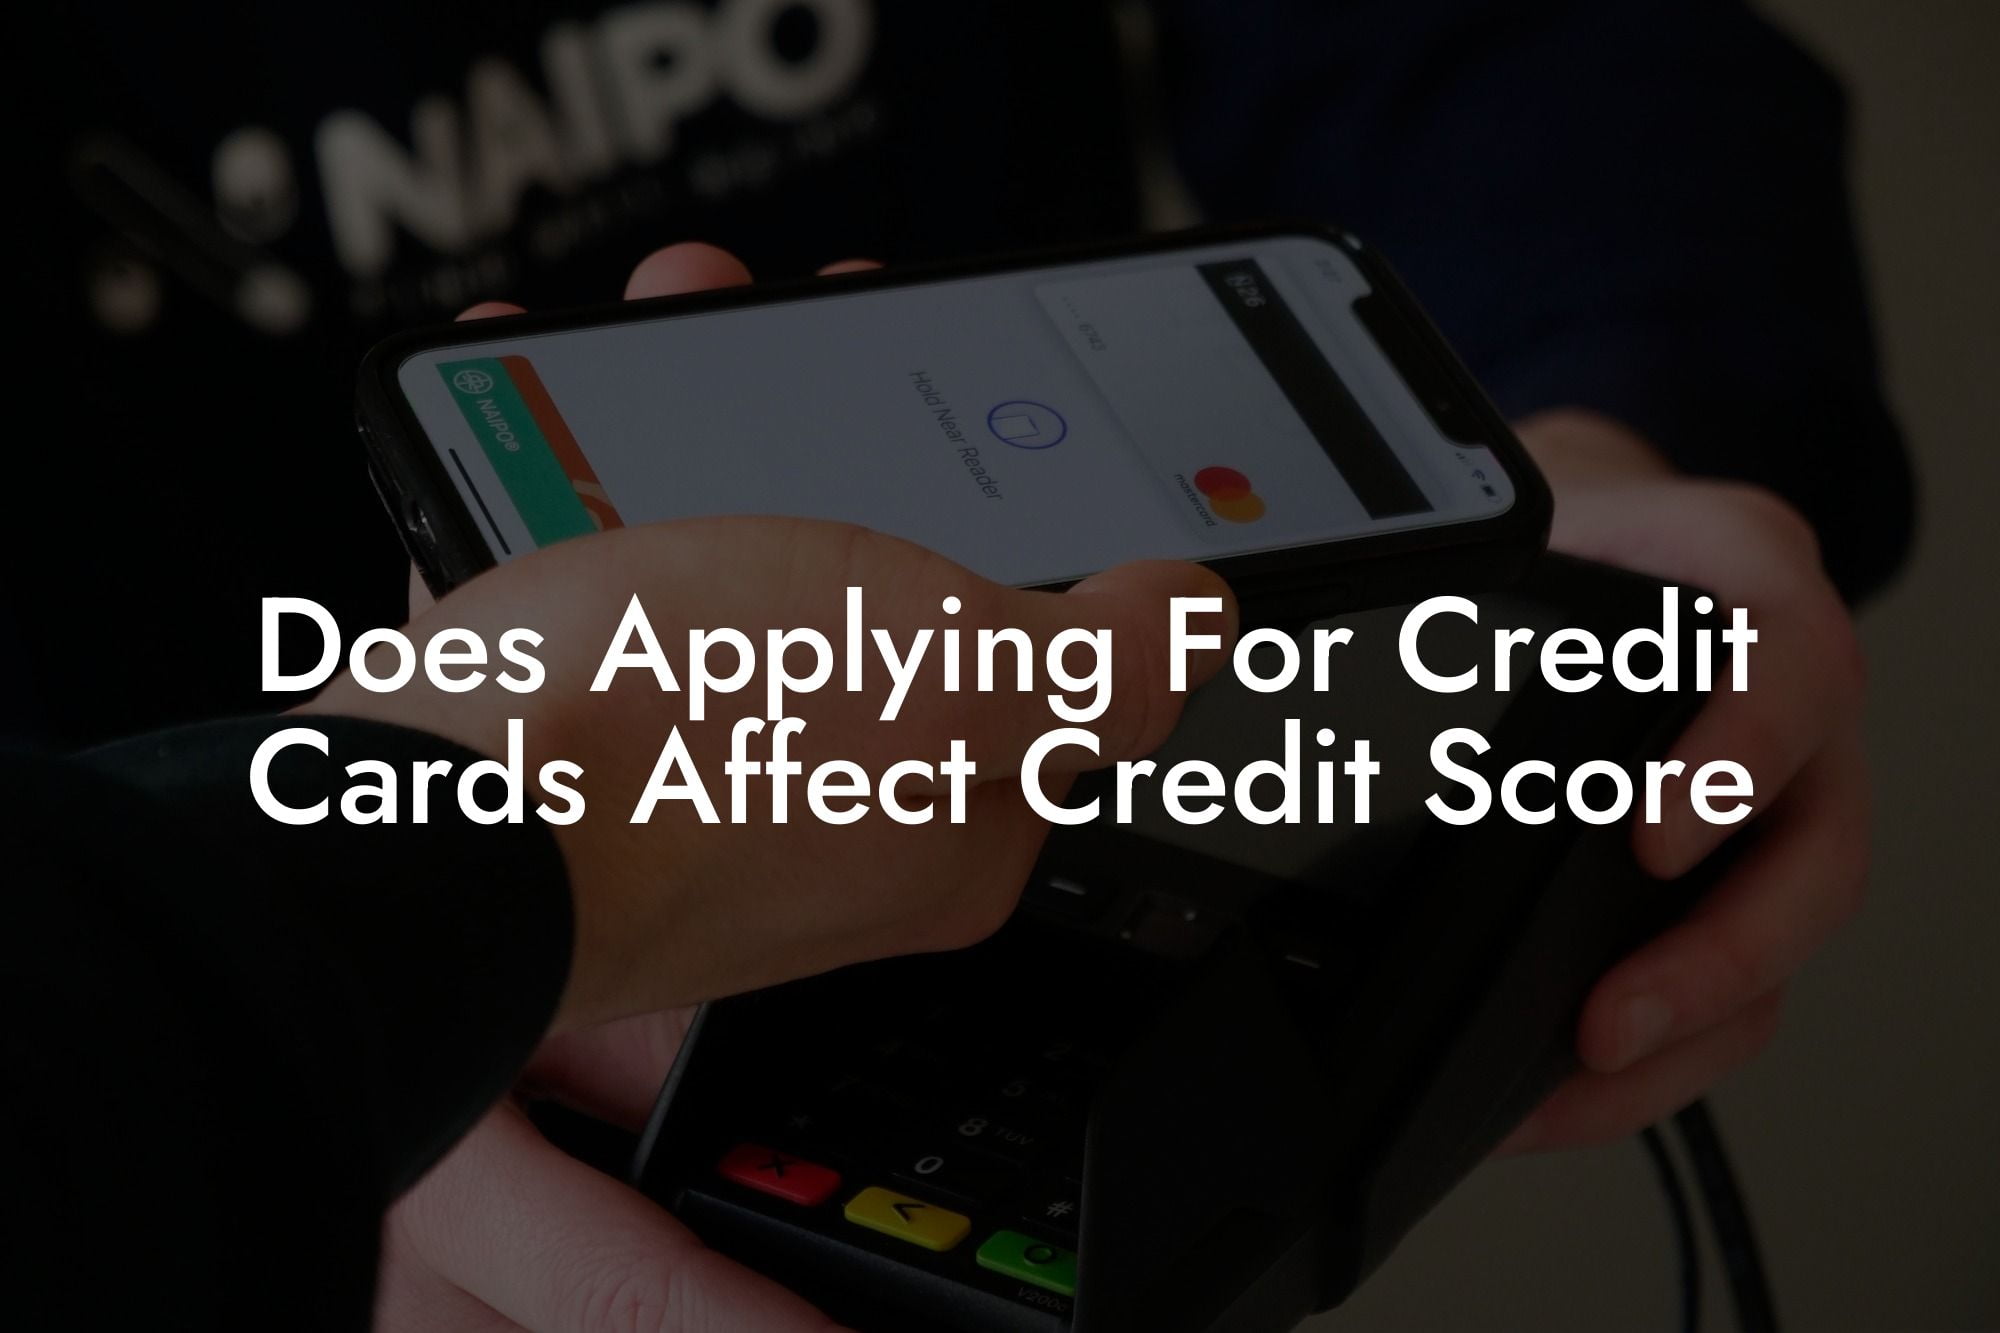 Does Applying For Credit Cards Affect Credit Score